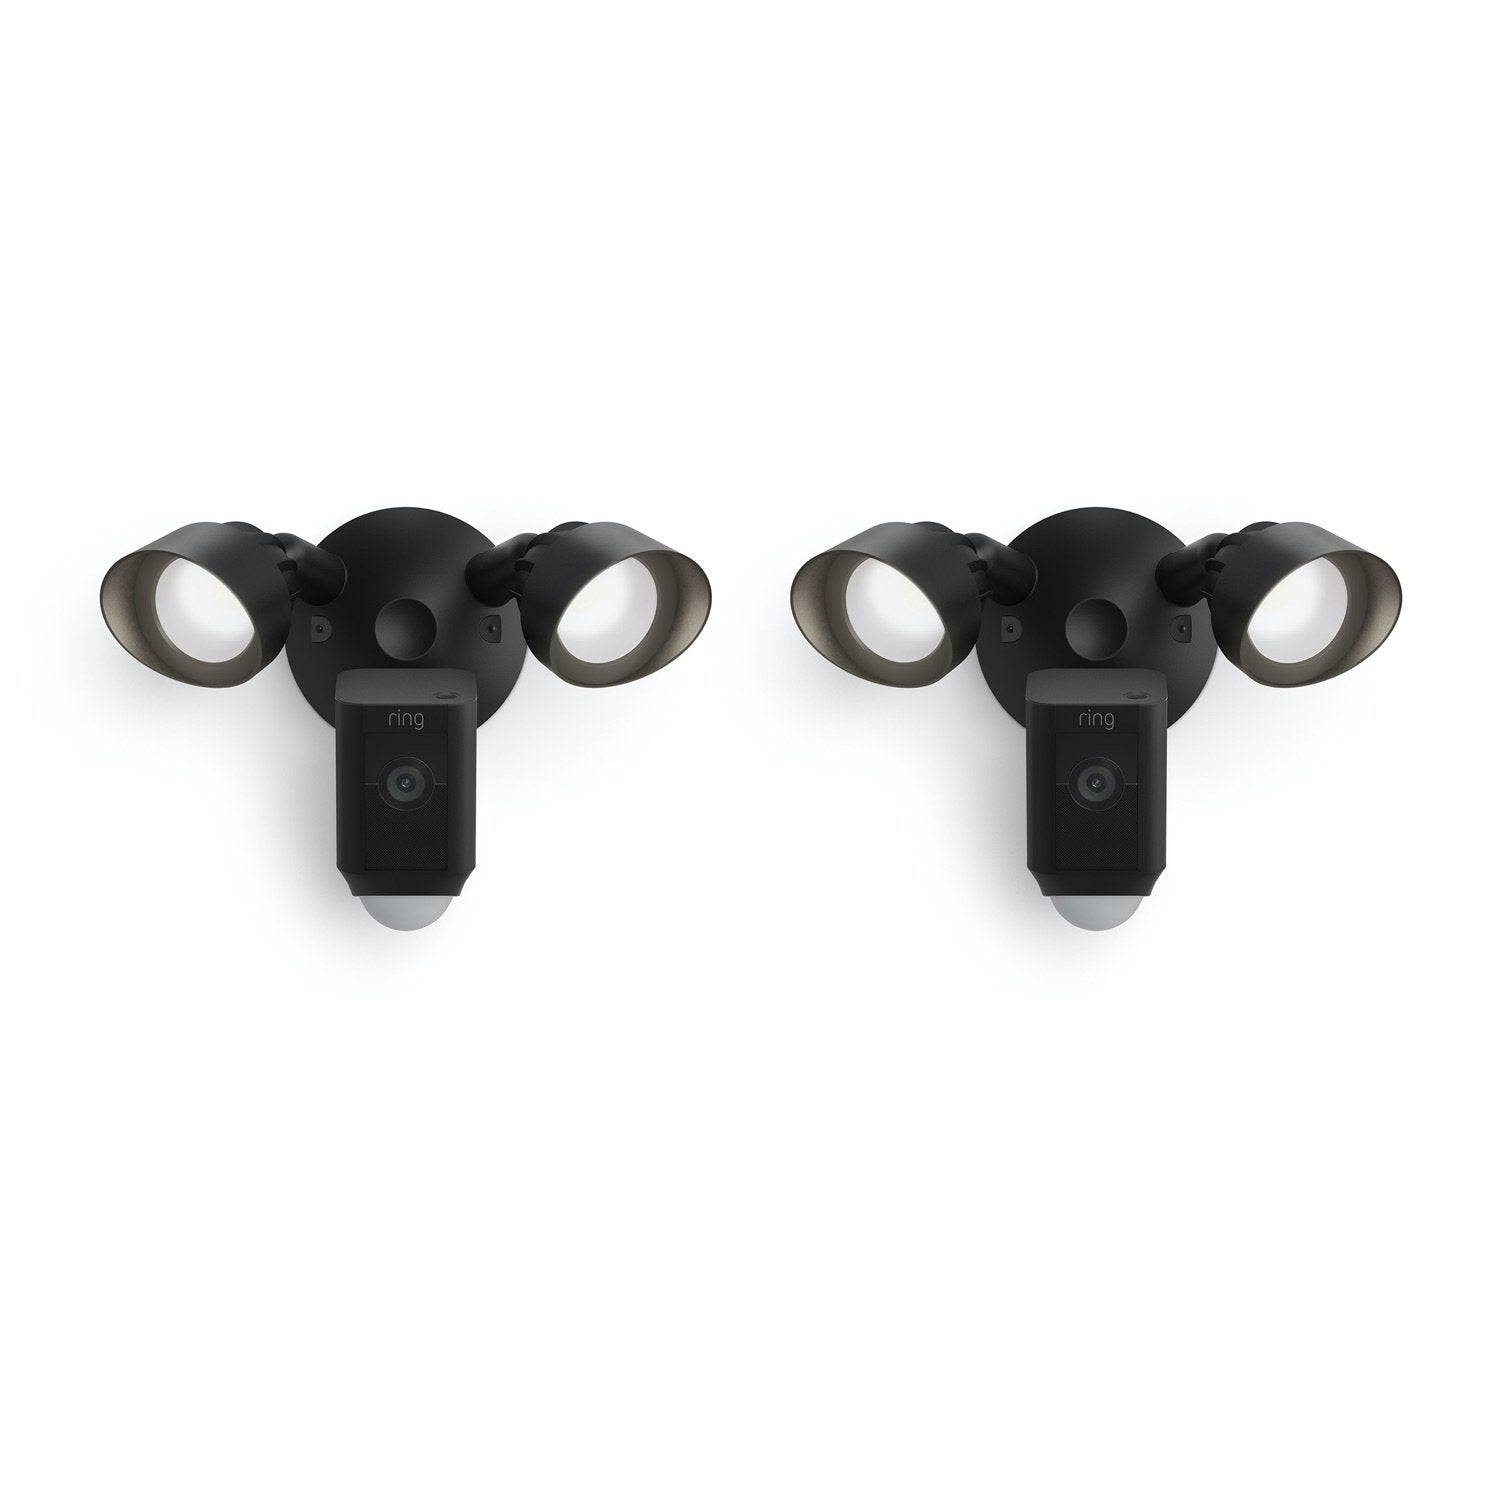 2-Pack Floodlight Cam Wired Plus - Black